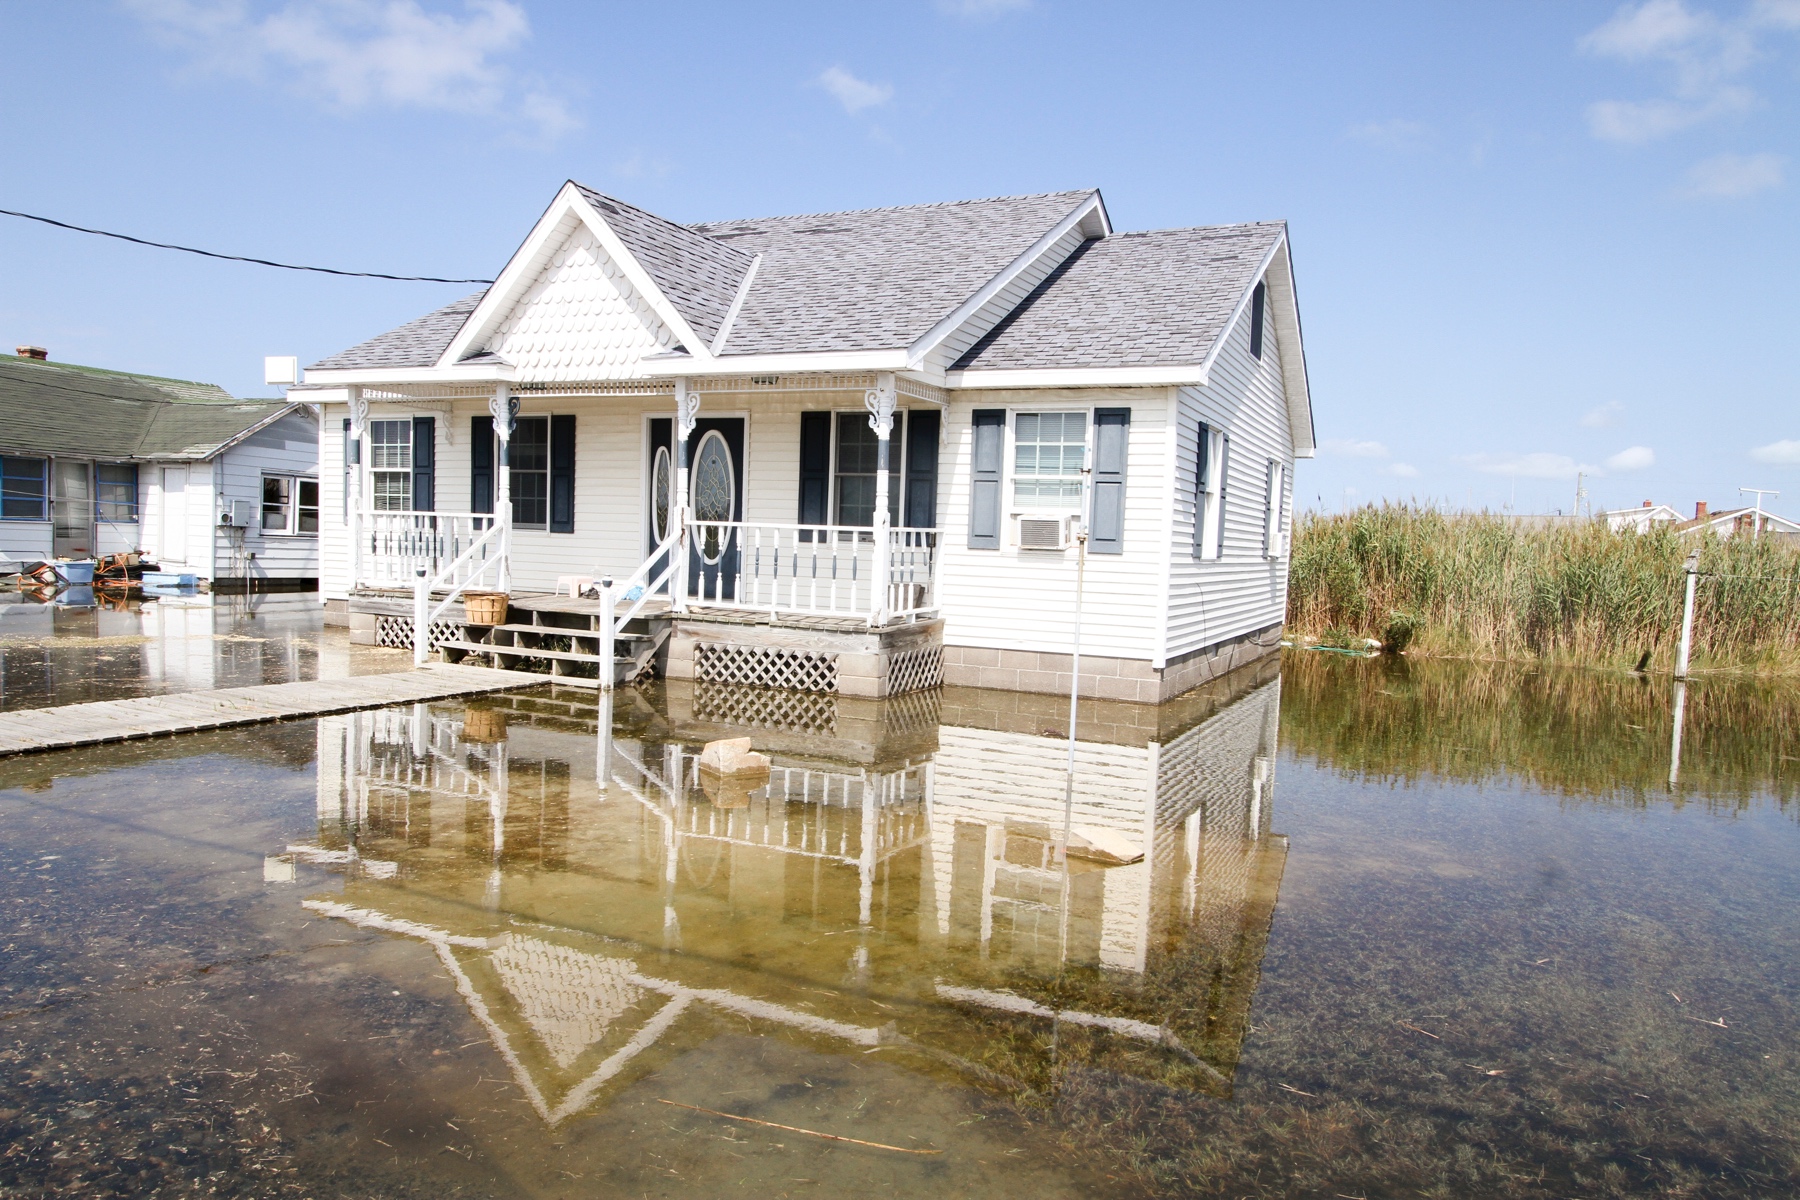 Town of Tangier occupied housing showing flooding at spring tide and recent precipitation. Note that the house and walkway to the house are both raised, the yard of the property is wetlands. Source: USACE, Norfolk District, Patrick Bloodgood, photographer.